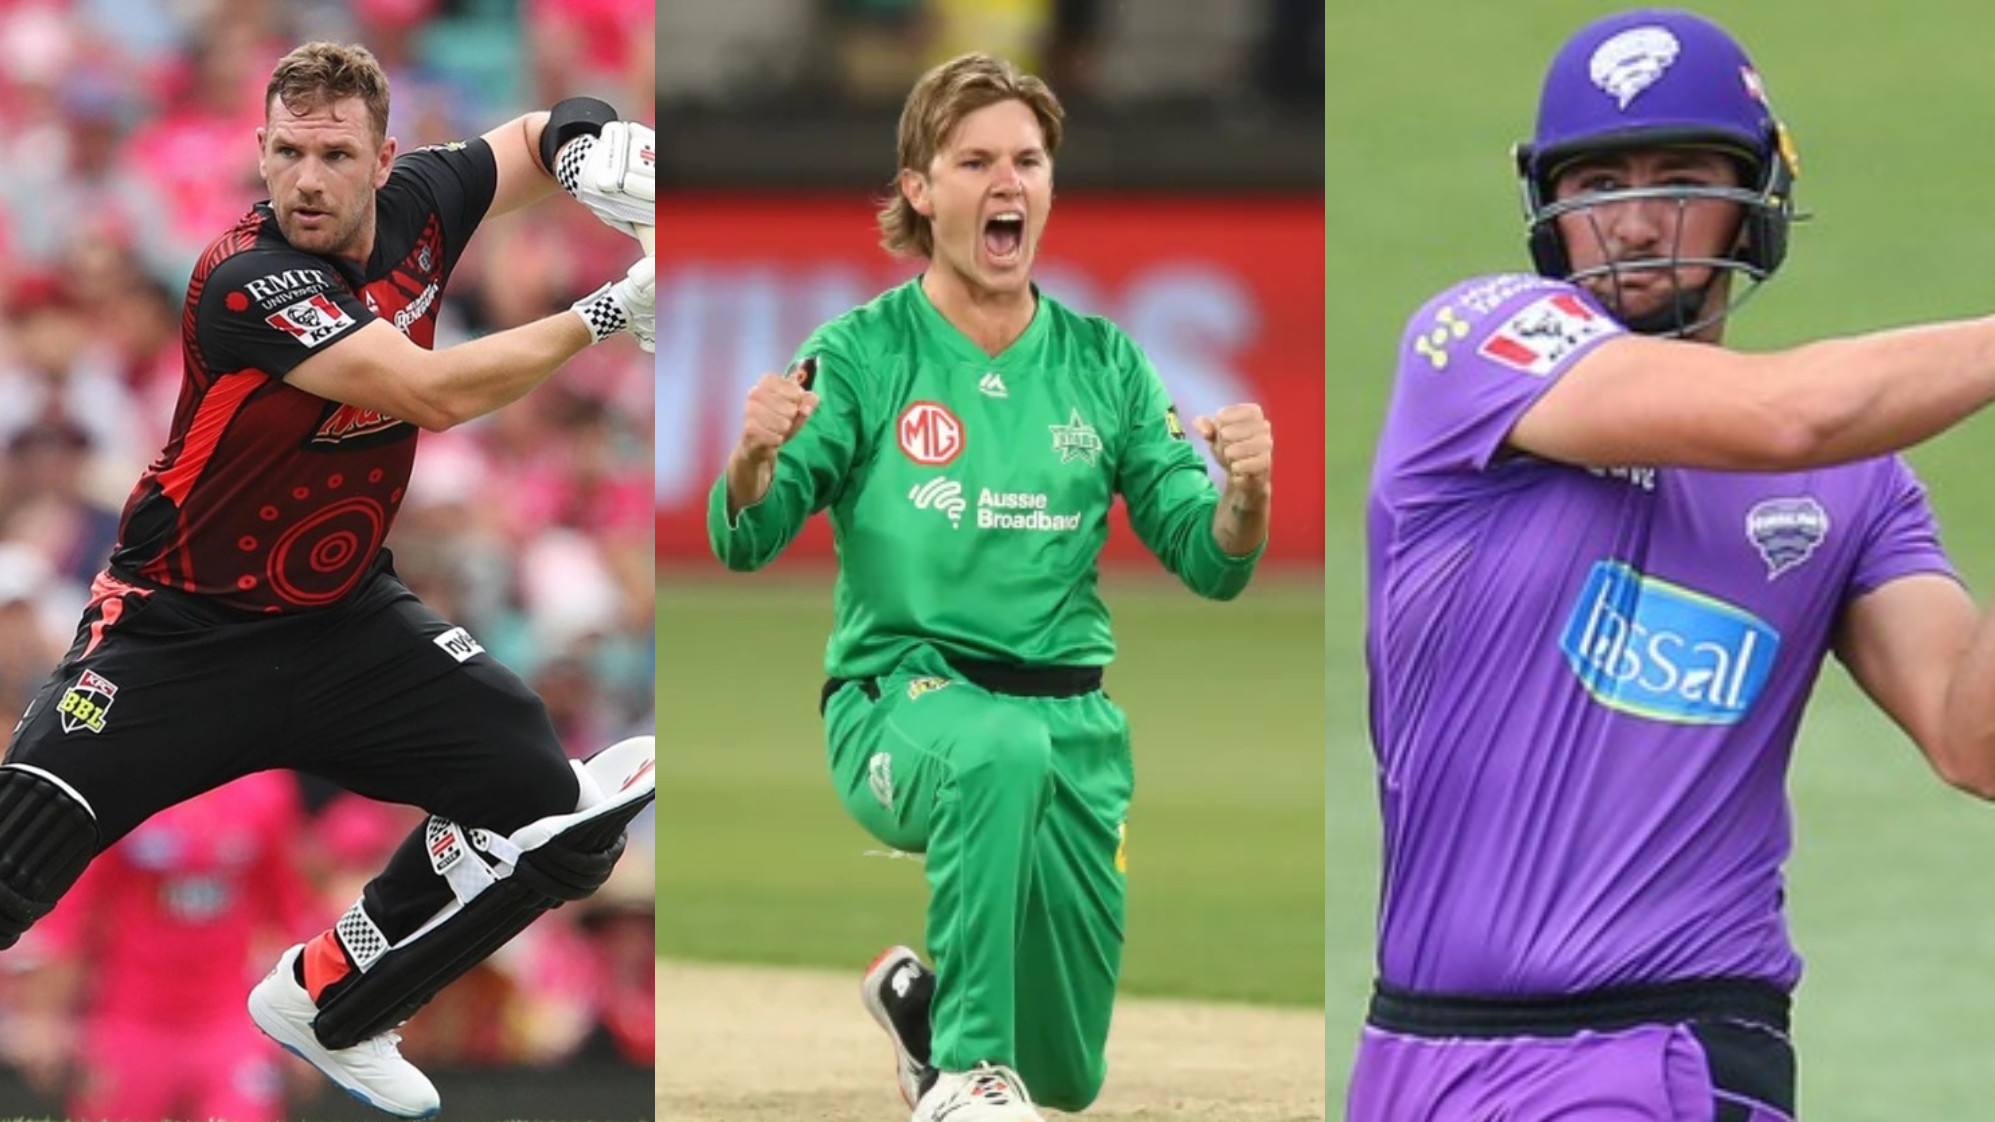 Rario D3 Predictions: Play for great prizes and grab exciting player cards for Big Bash League